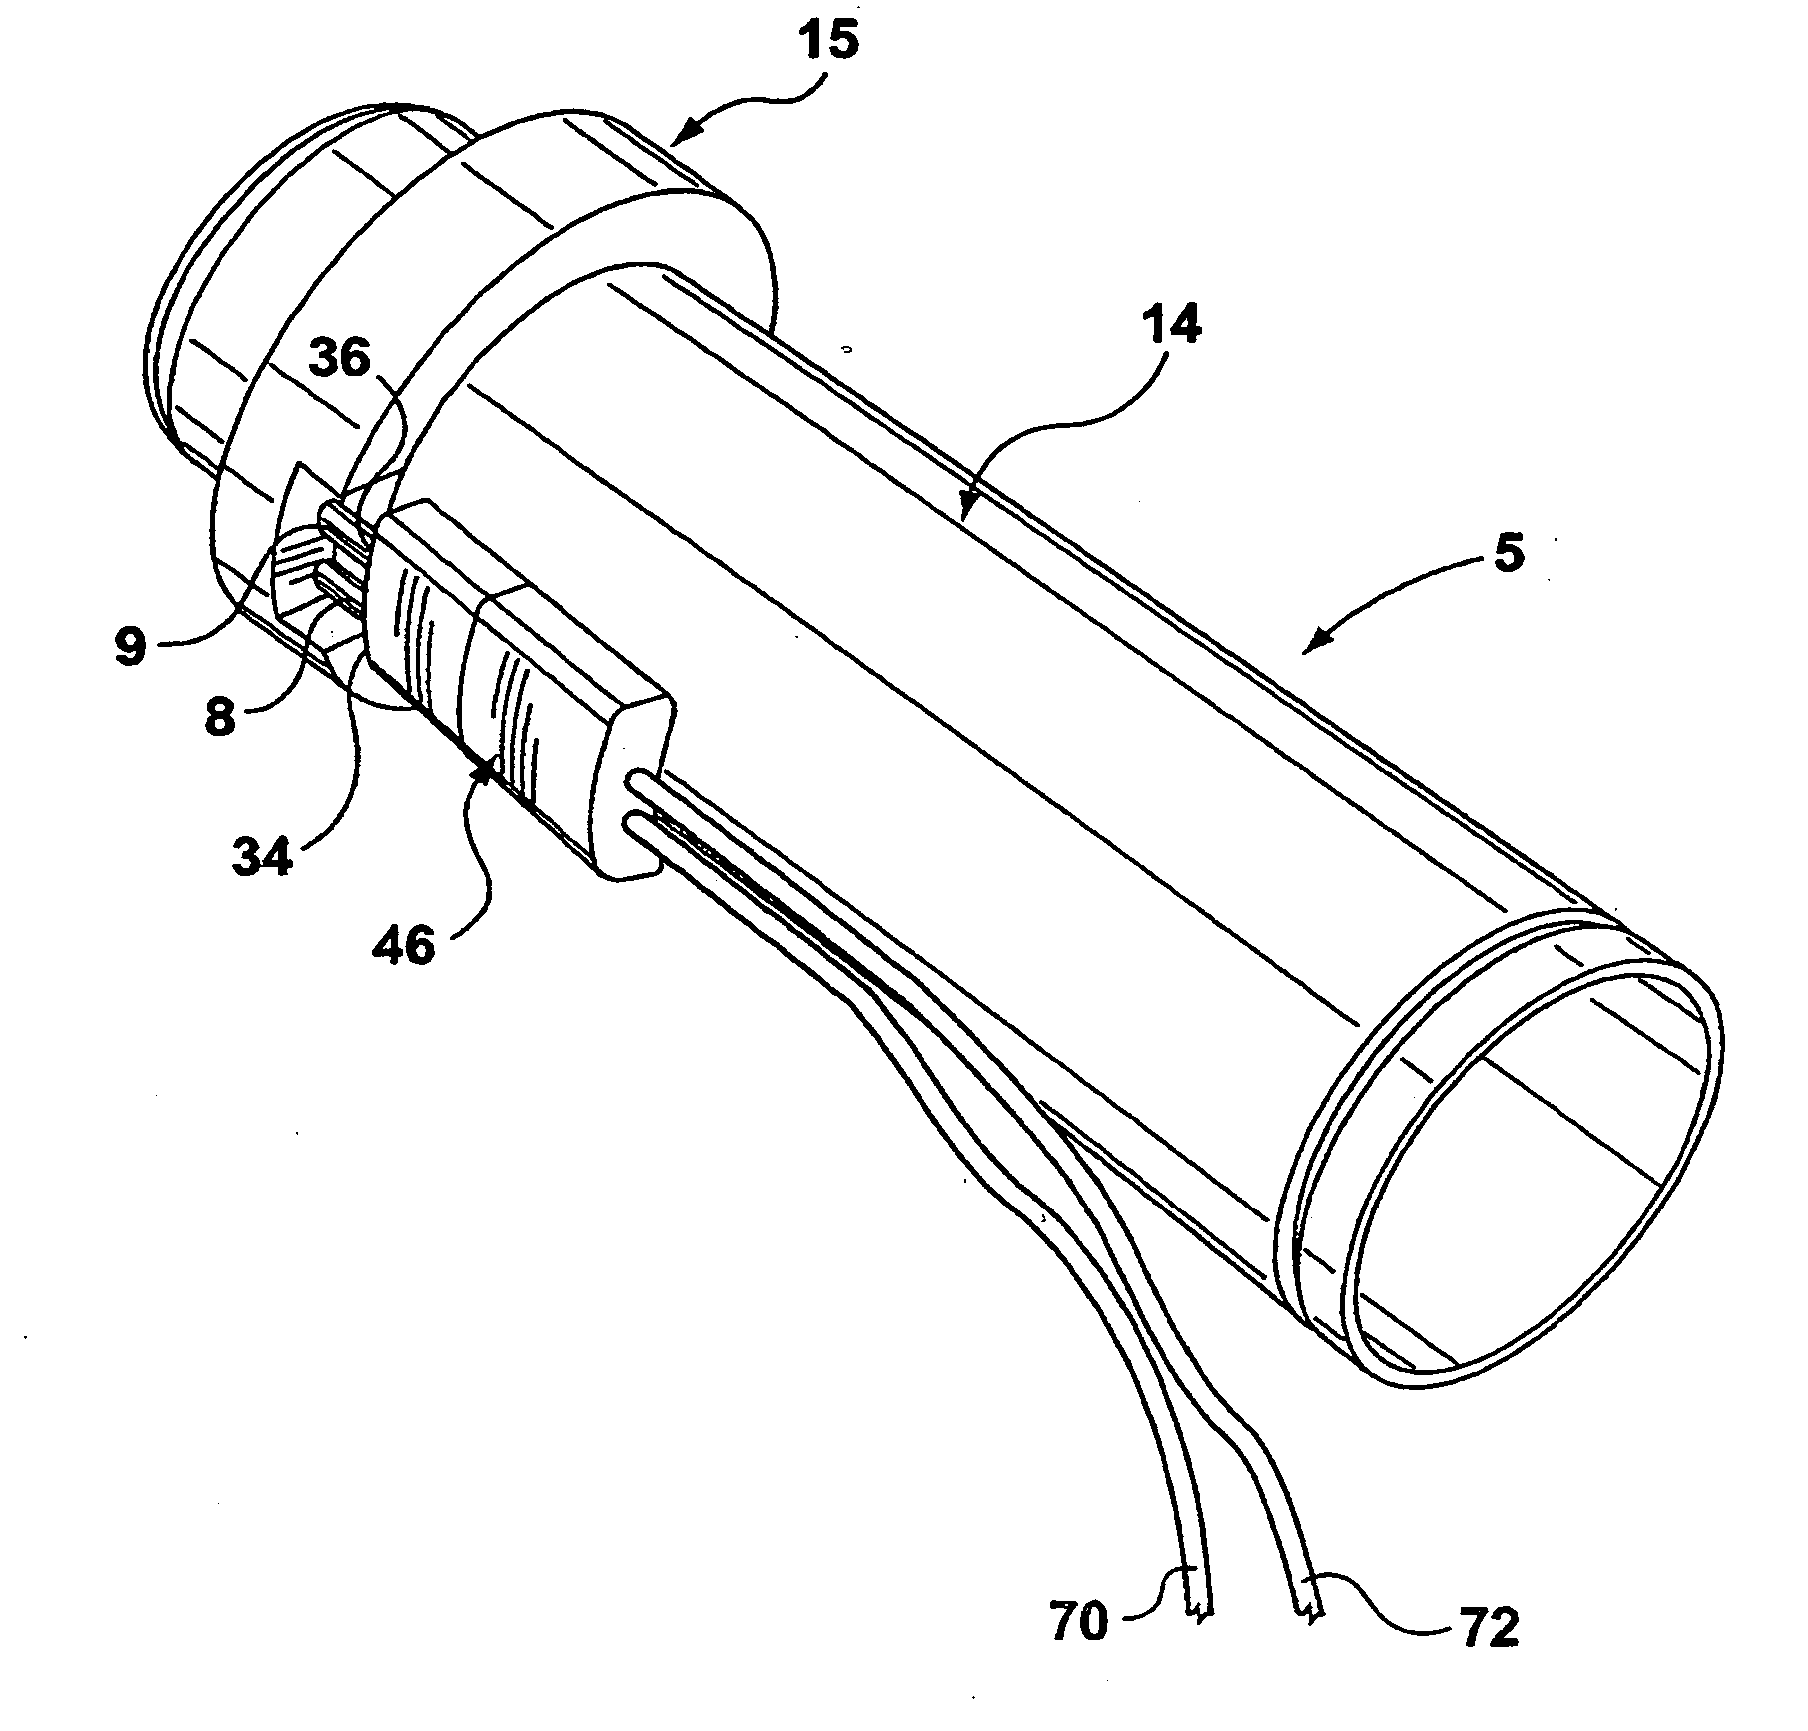 Electrical connector assembly for an arcuate surface in a high temperature environment and an associated method of use